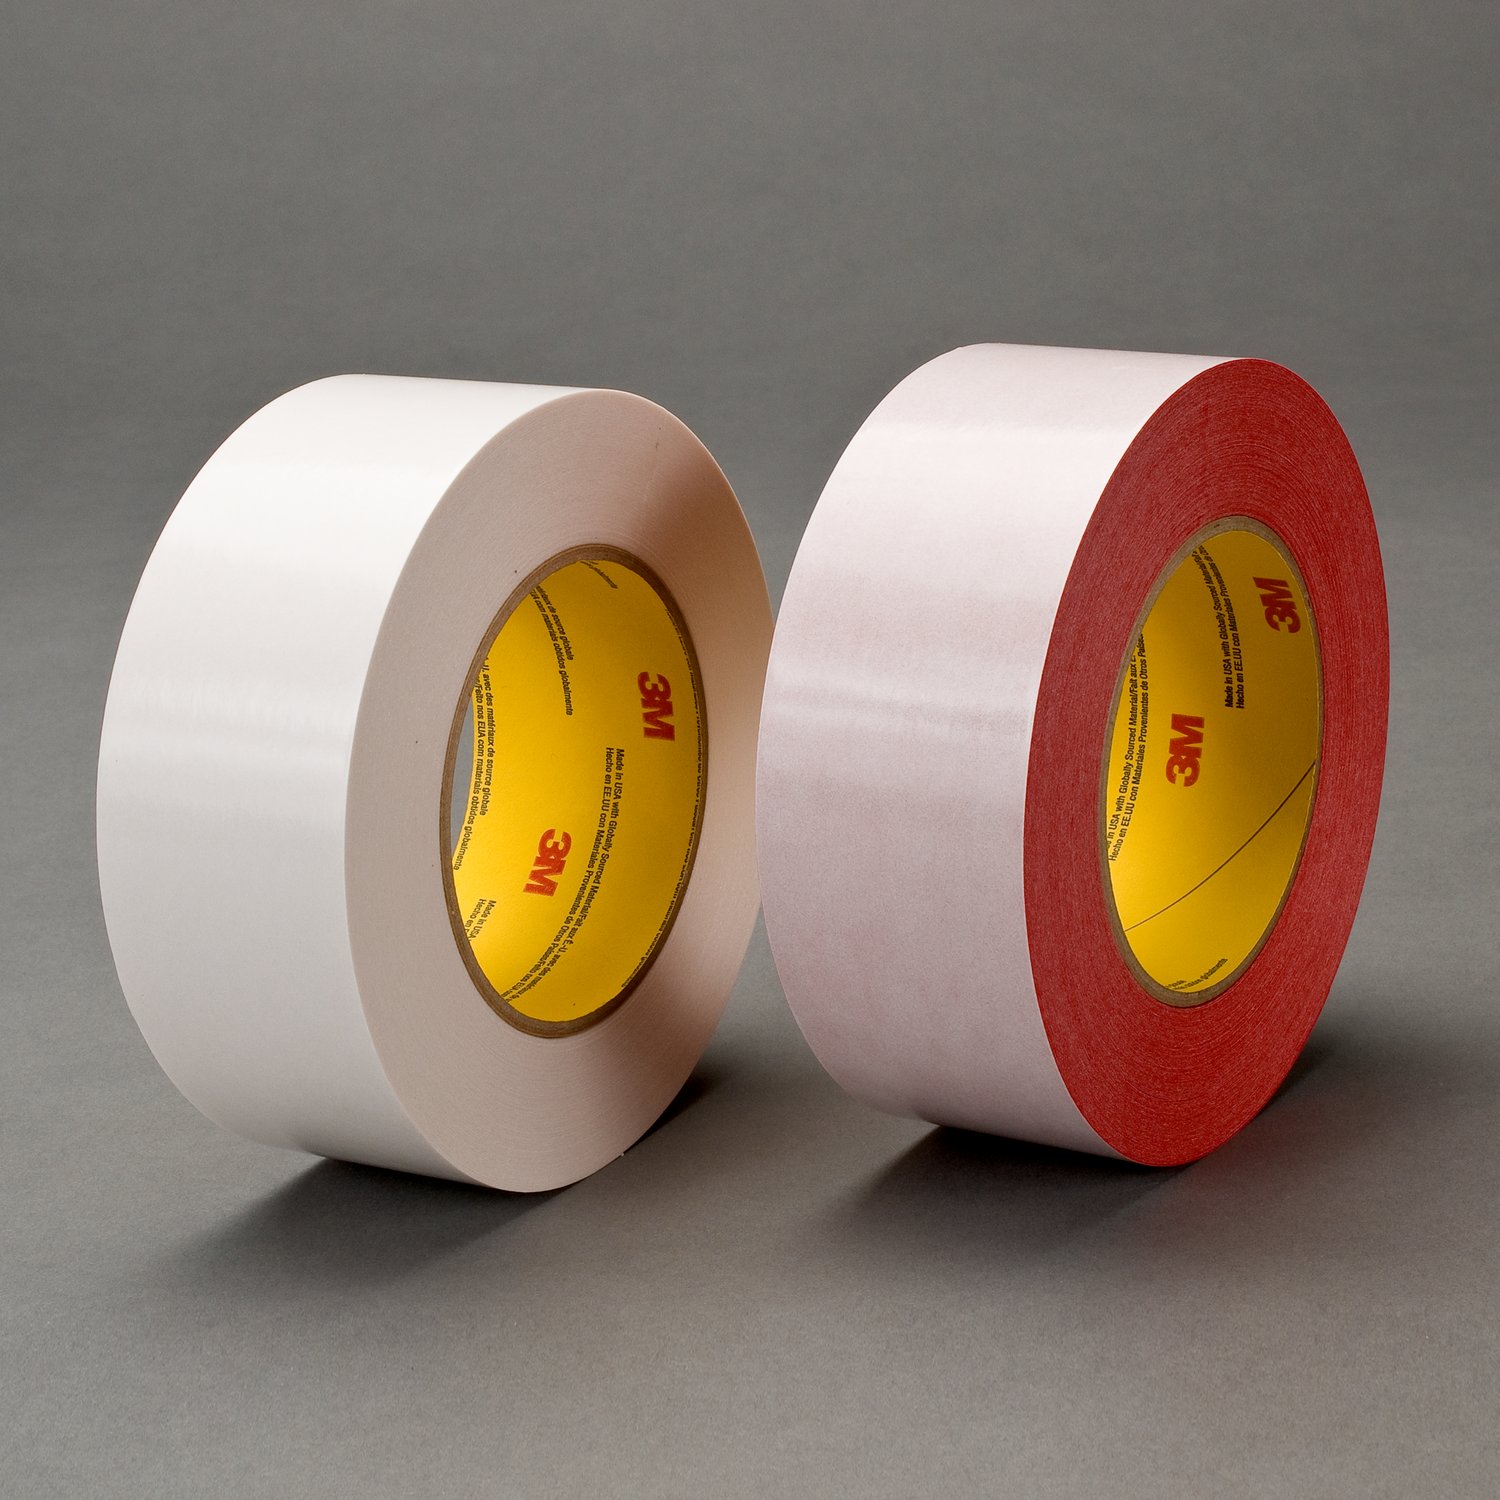 7010335370 - 3M Double Coated Tape 9738, Clear, 12 mm x 55 m, 4.3 mil, 96 rolls per
case